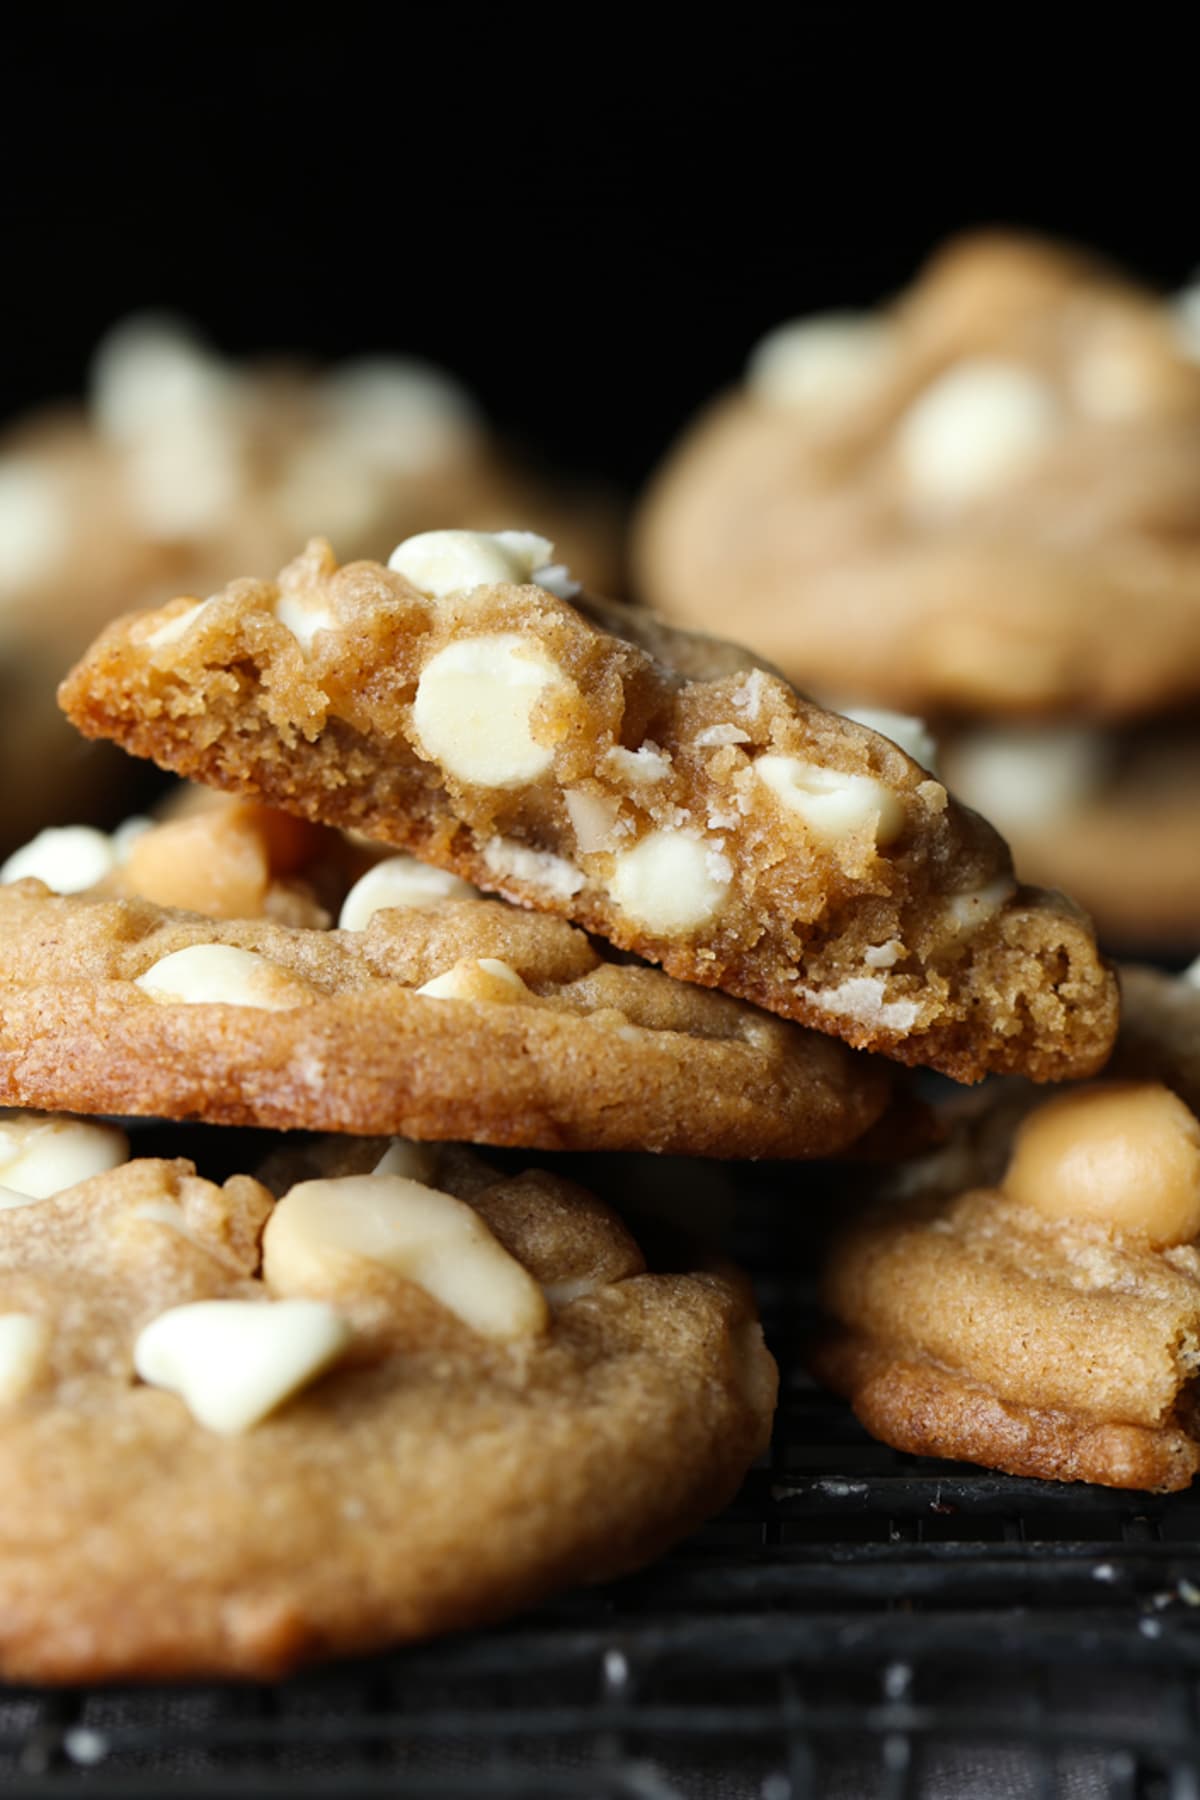 White Chocolate Macadamia Nut Cookies stacked and broken in half showing the gooey centers